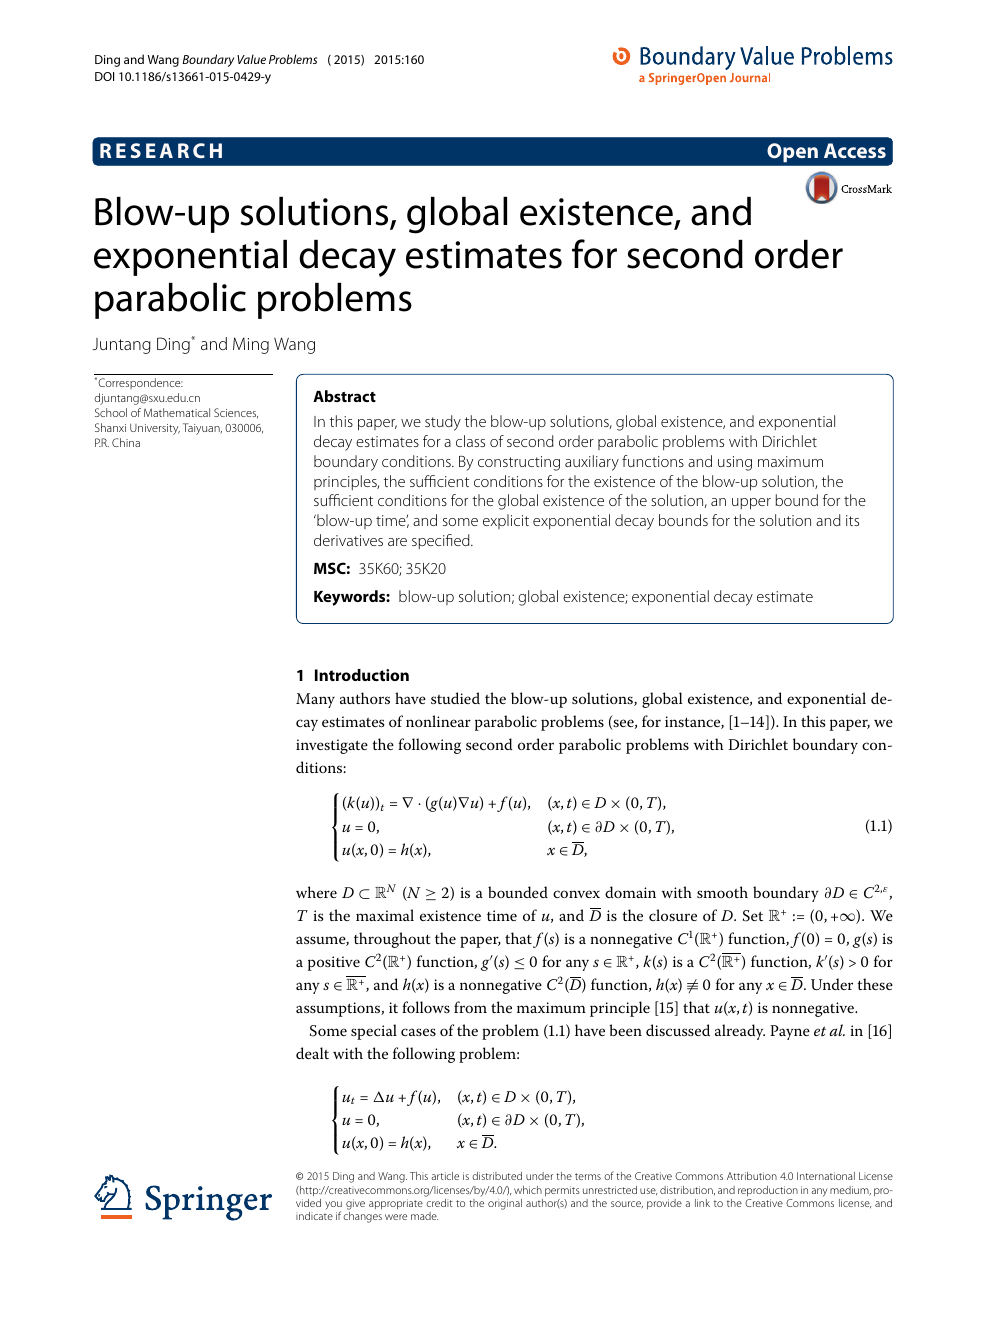 Blow Up Solutions Global Existence And Exponential Decay Estimates For Second Order Parabolic Problems Topic Of Research Paper In Mathematics Download Scholarly Article Pdf And Read For Free On Cyberleninka Open Science